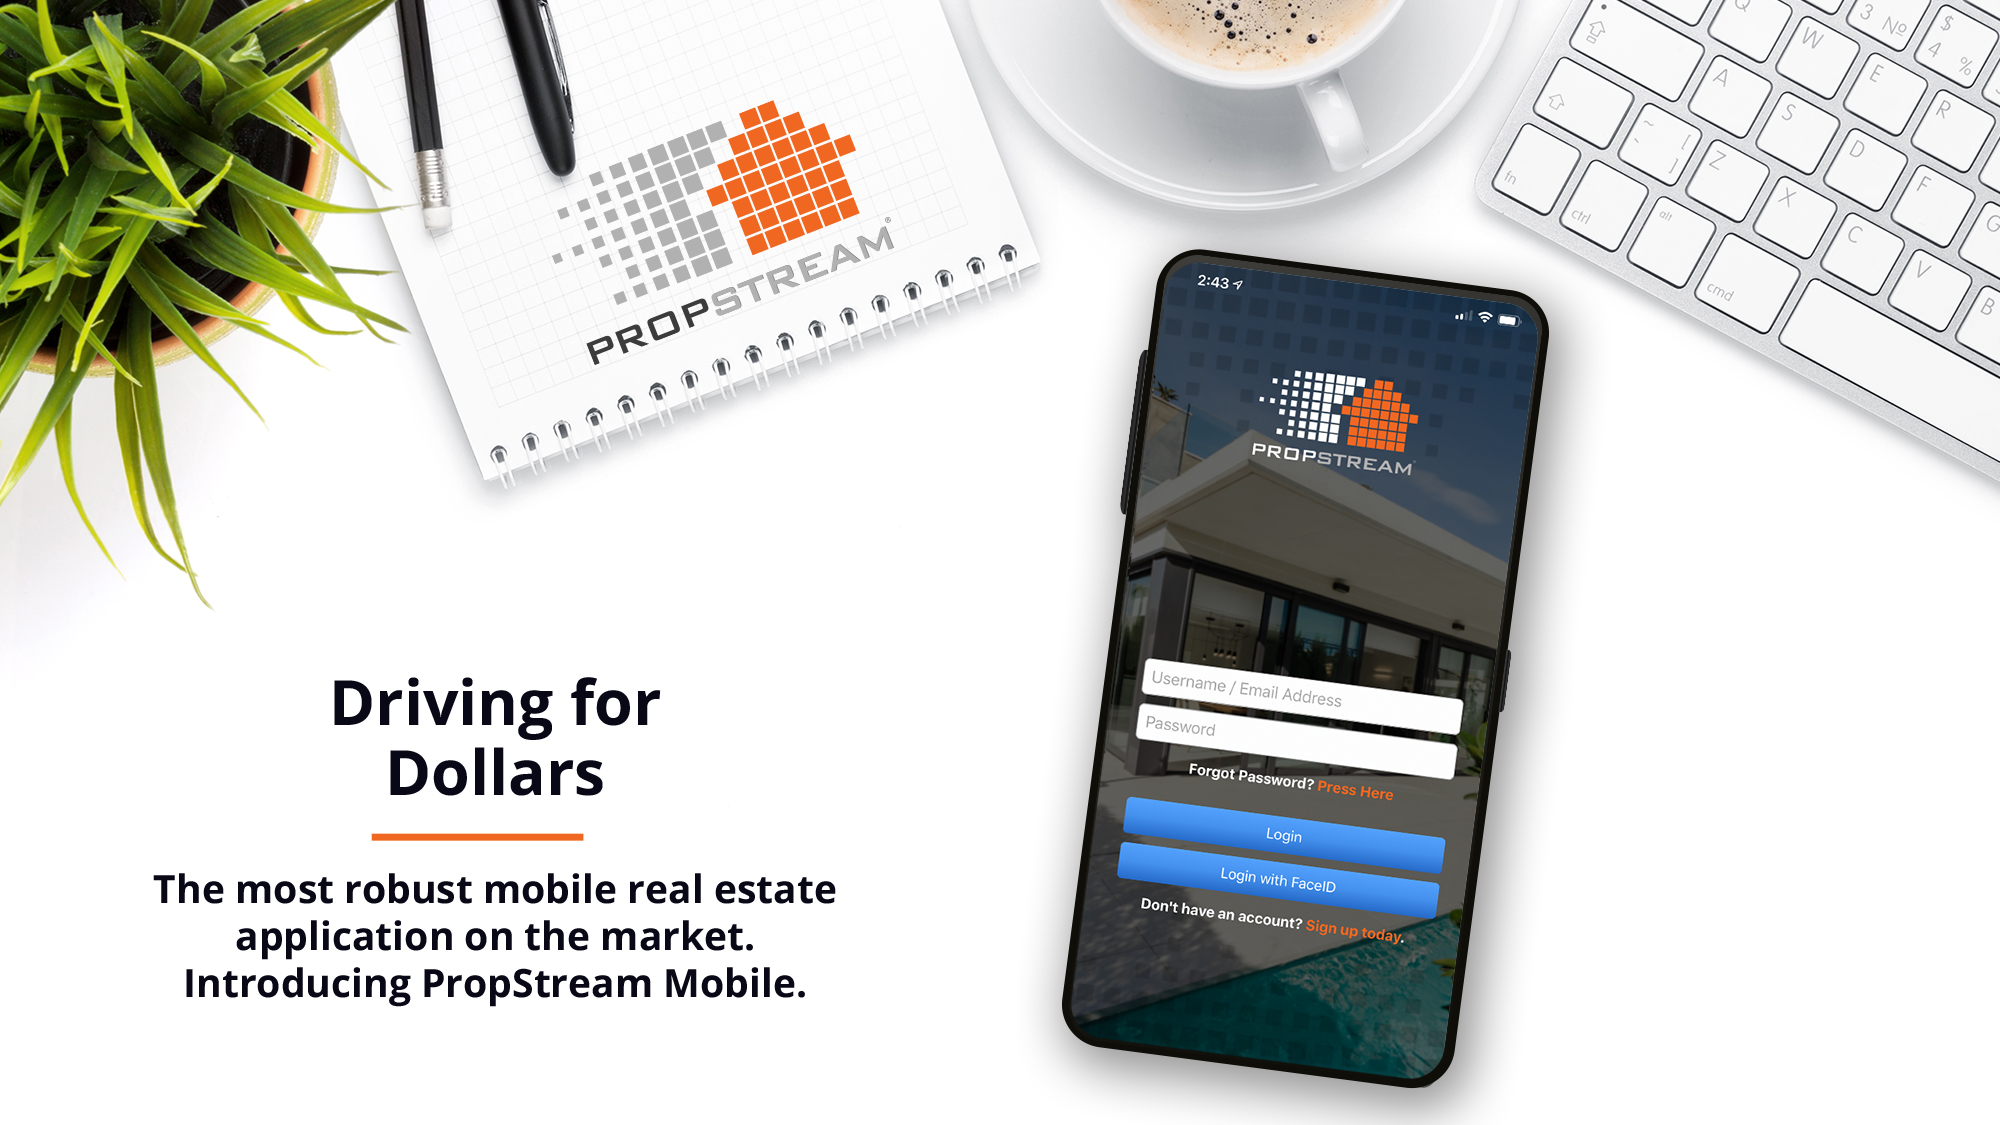 Driving for Dollars with PropStream Mobile